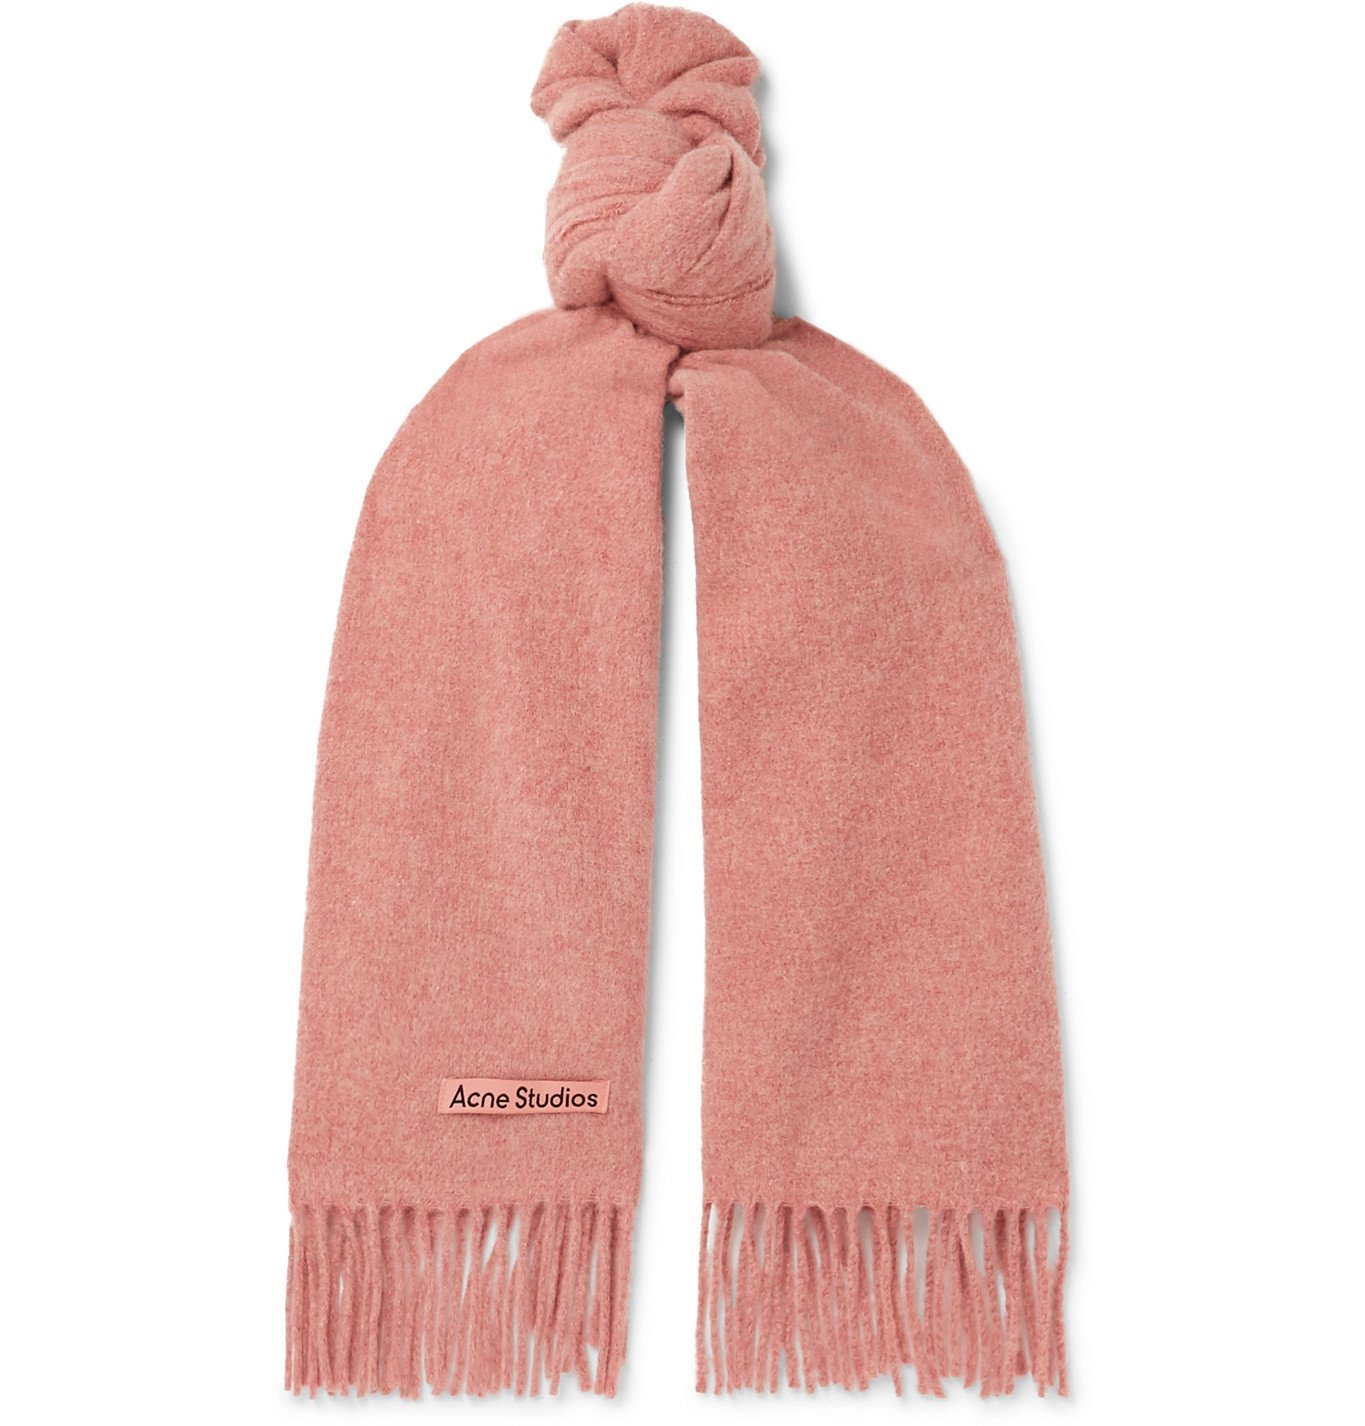 aircraft hat catch up Acne Studios - Canada Narrow Fringed Mélange Wool Scarf - Pink Acne Studios